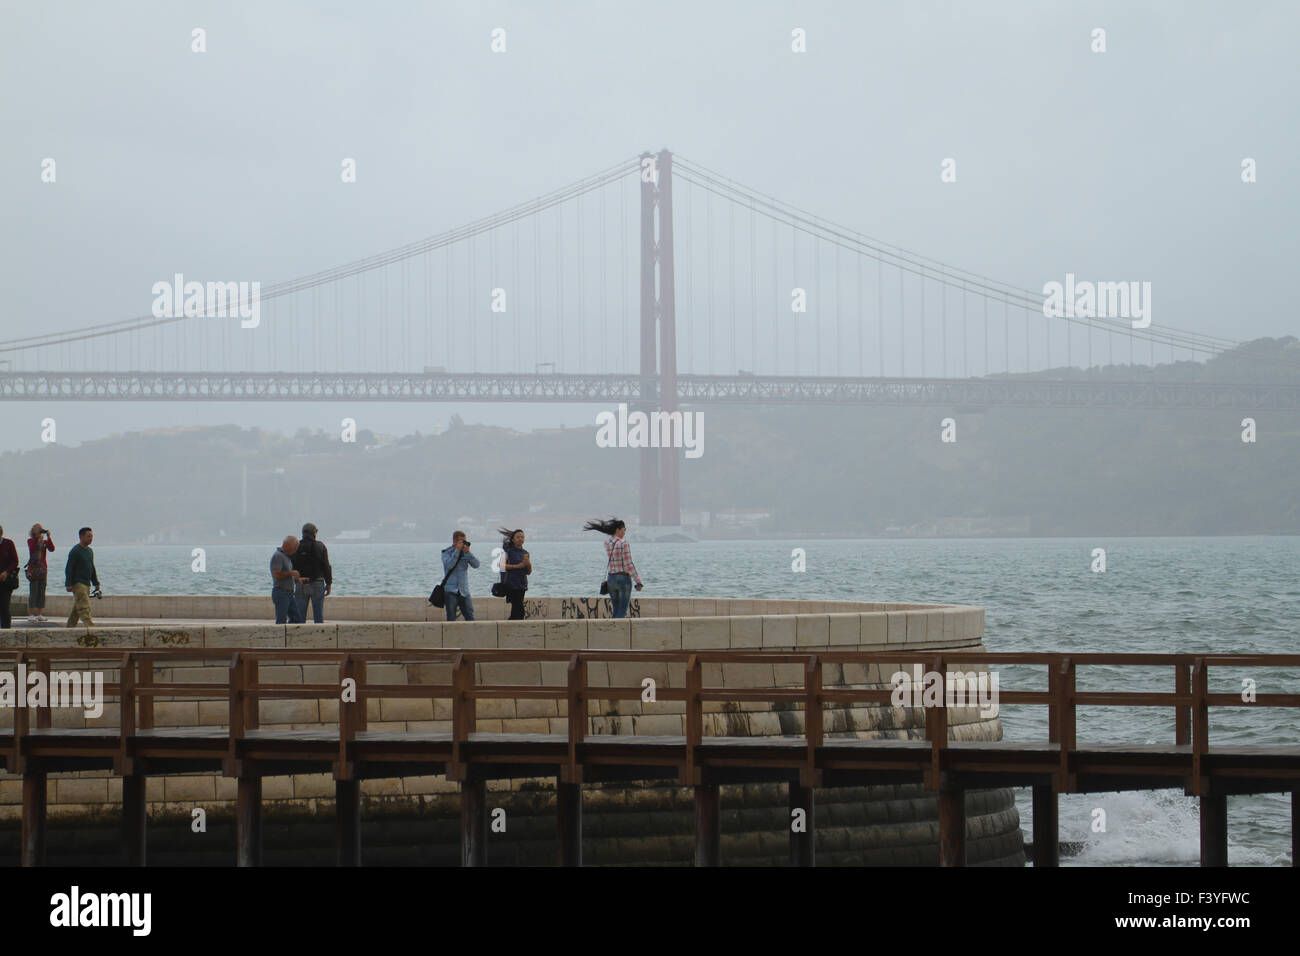 Lisbon, Portugal, 5 October, 2015. People seen by the north bank of Tegus river with a back drop of the 2km-long 25th of April Bridge. The suspension bridge links Lisbon with Almada was inaugurated on August 6, 1966. Credit: David Mbiyu/ Alamy Live News Stock Photo